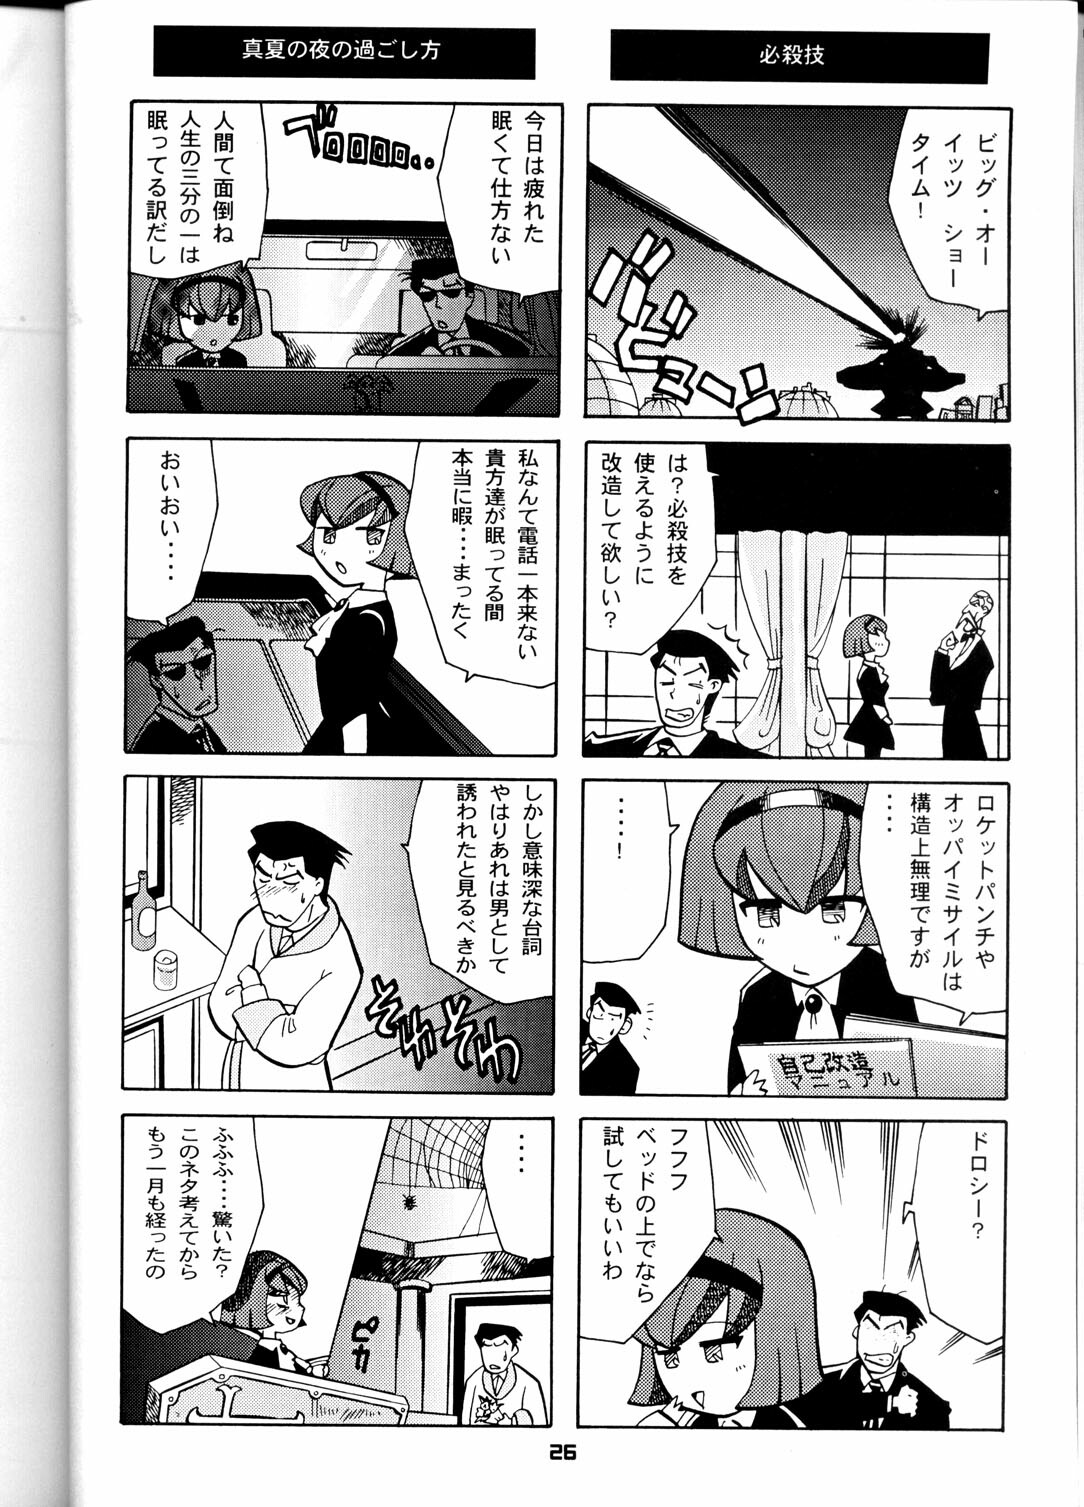 (C58) [T2 UNIT (Various)] OH! Robo Musume Chuushuugou! (Various) page 26 full